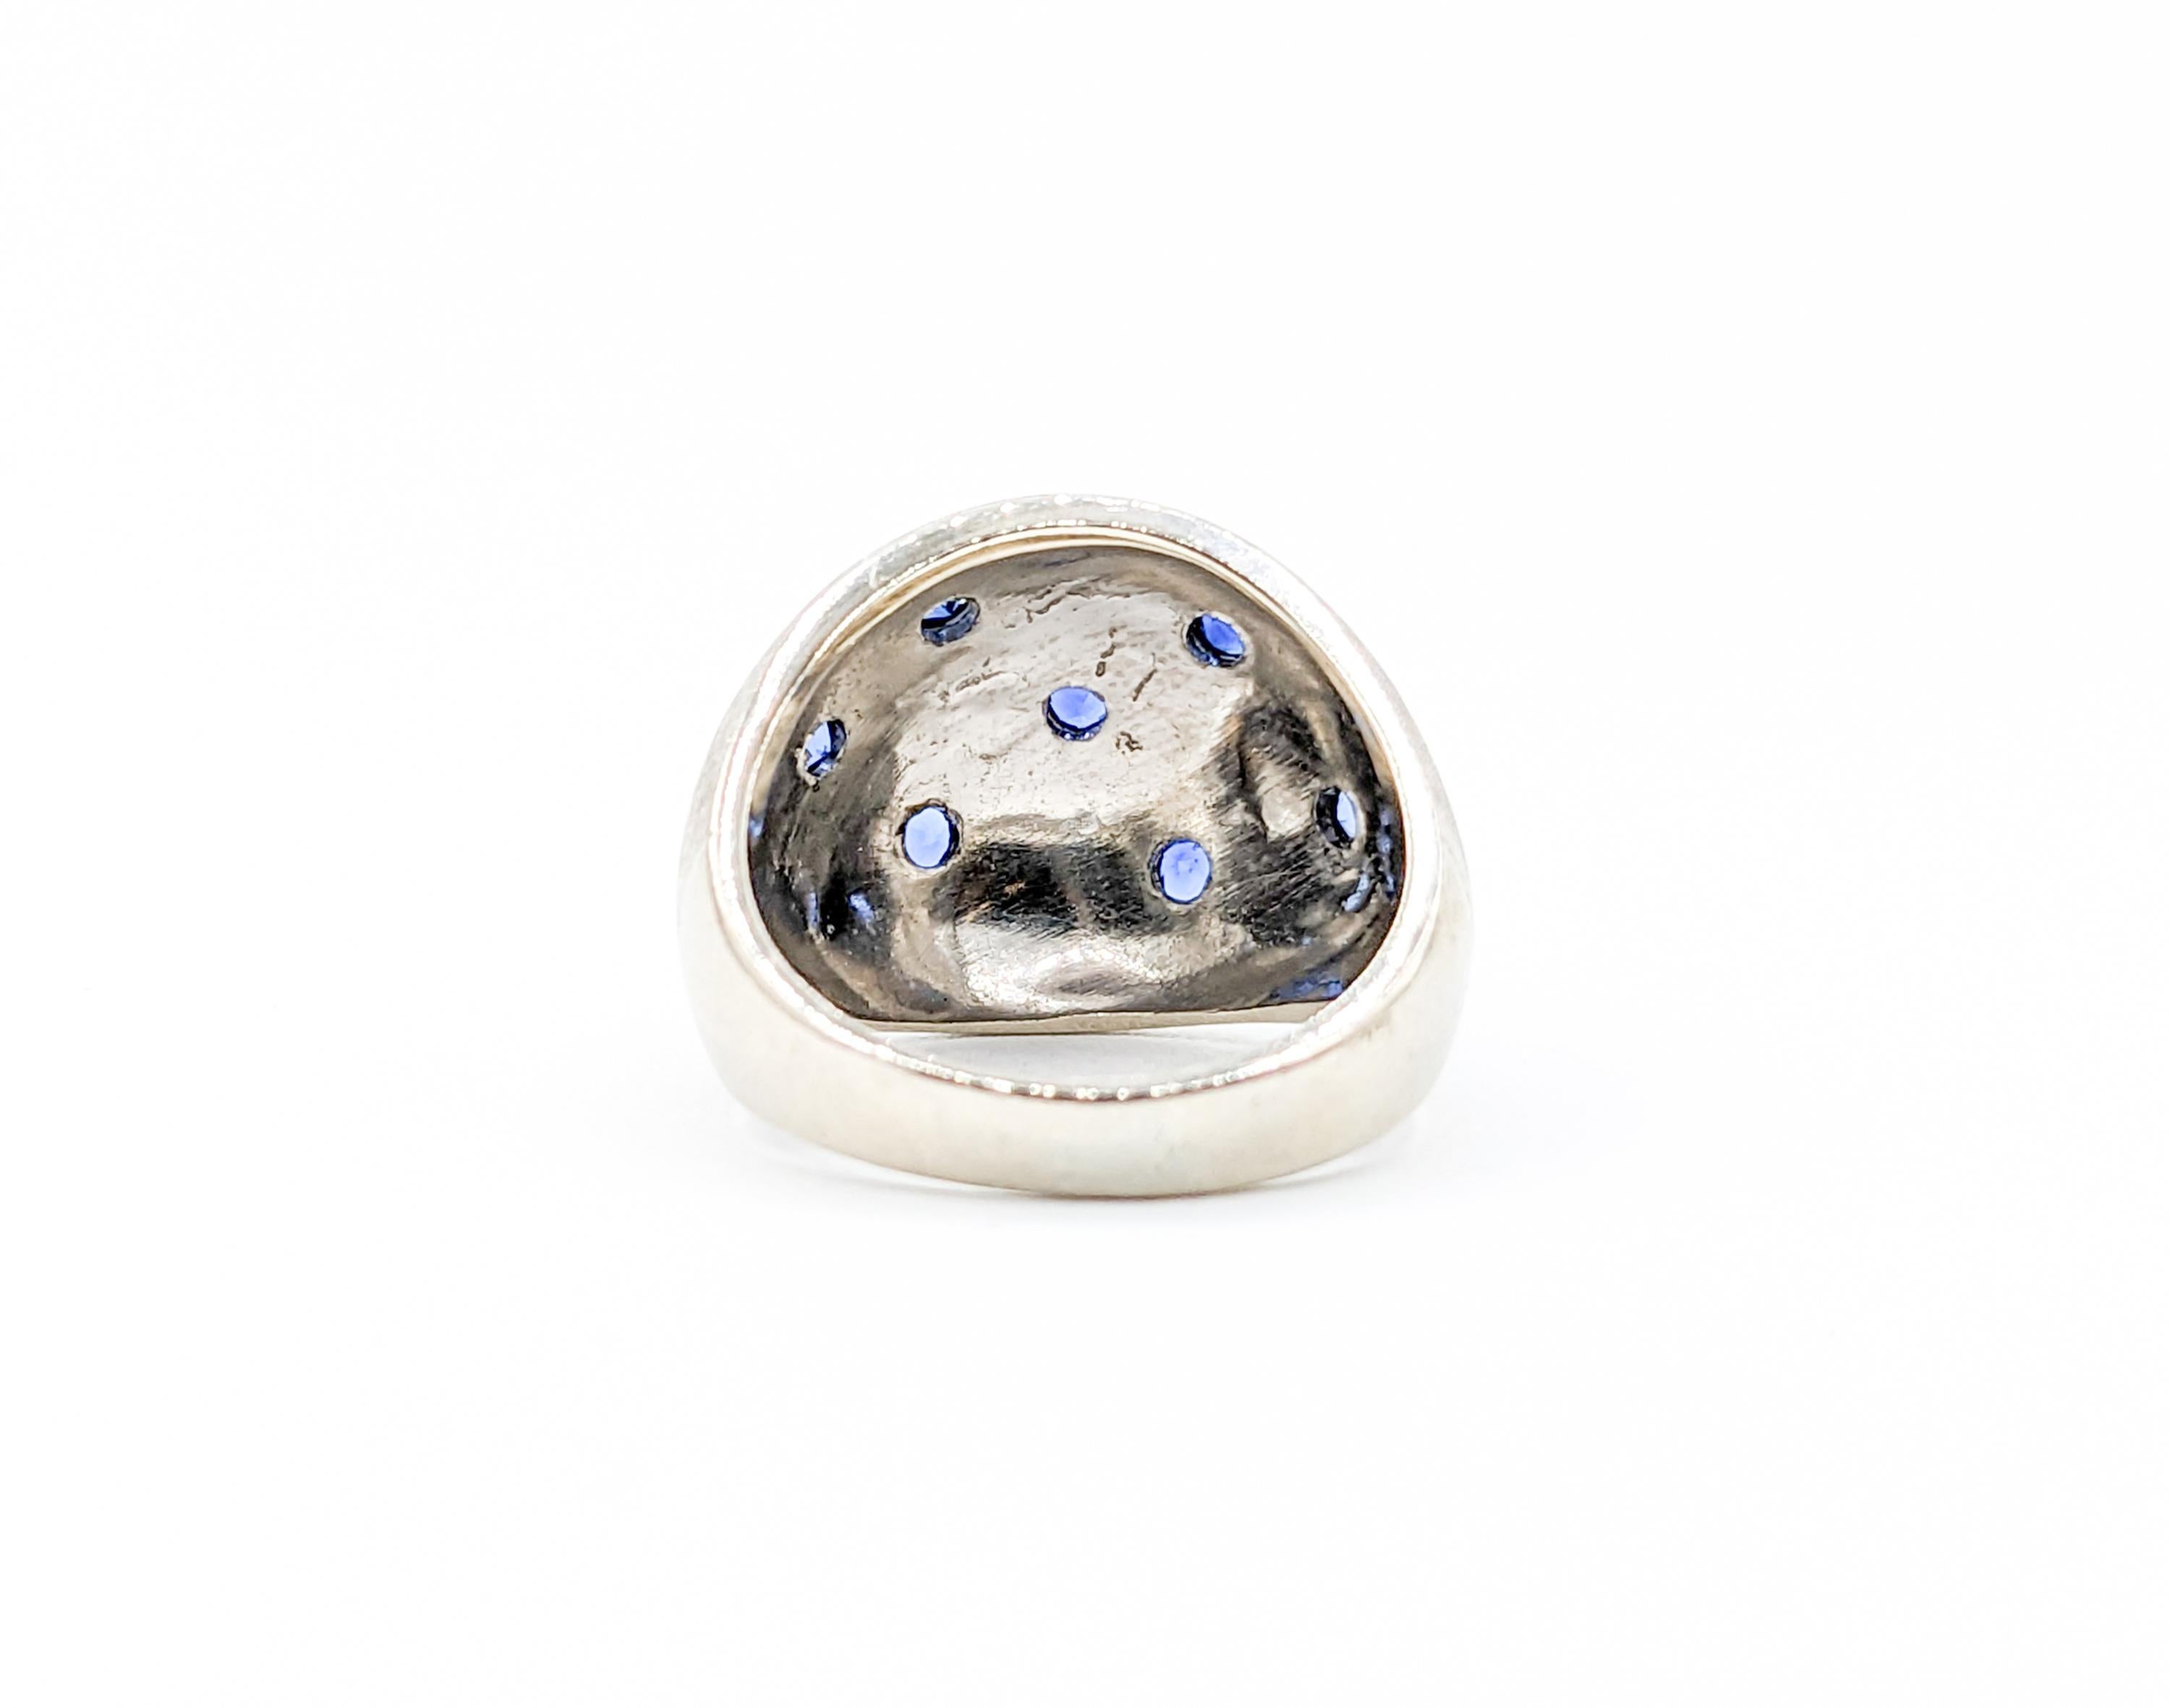 Starry Set Sapphire Bombe Ring in 14kt White Gold In Excellent Condition For Sale In Bloomington, MN